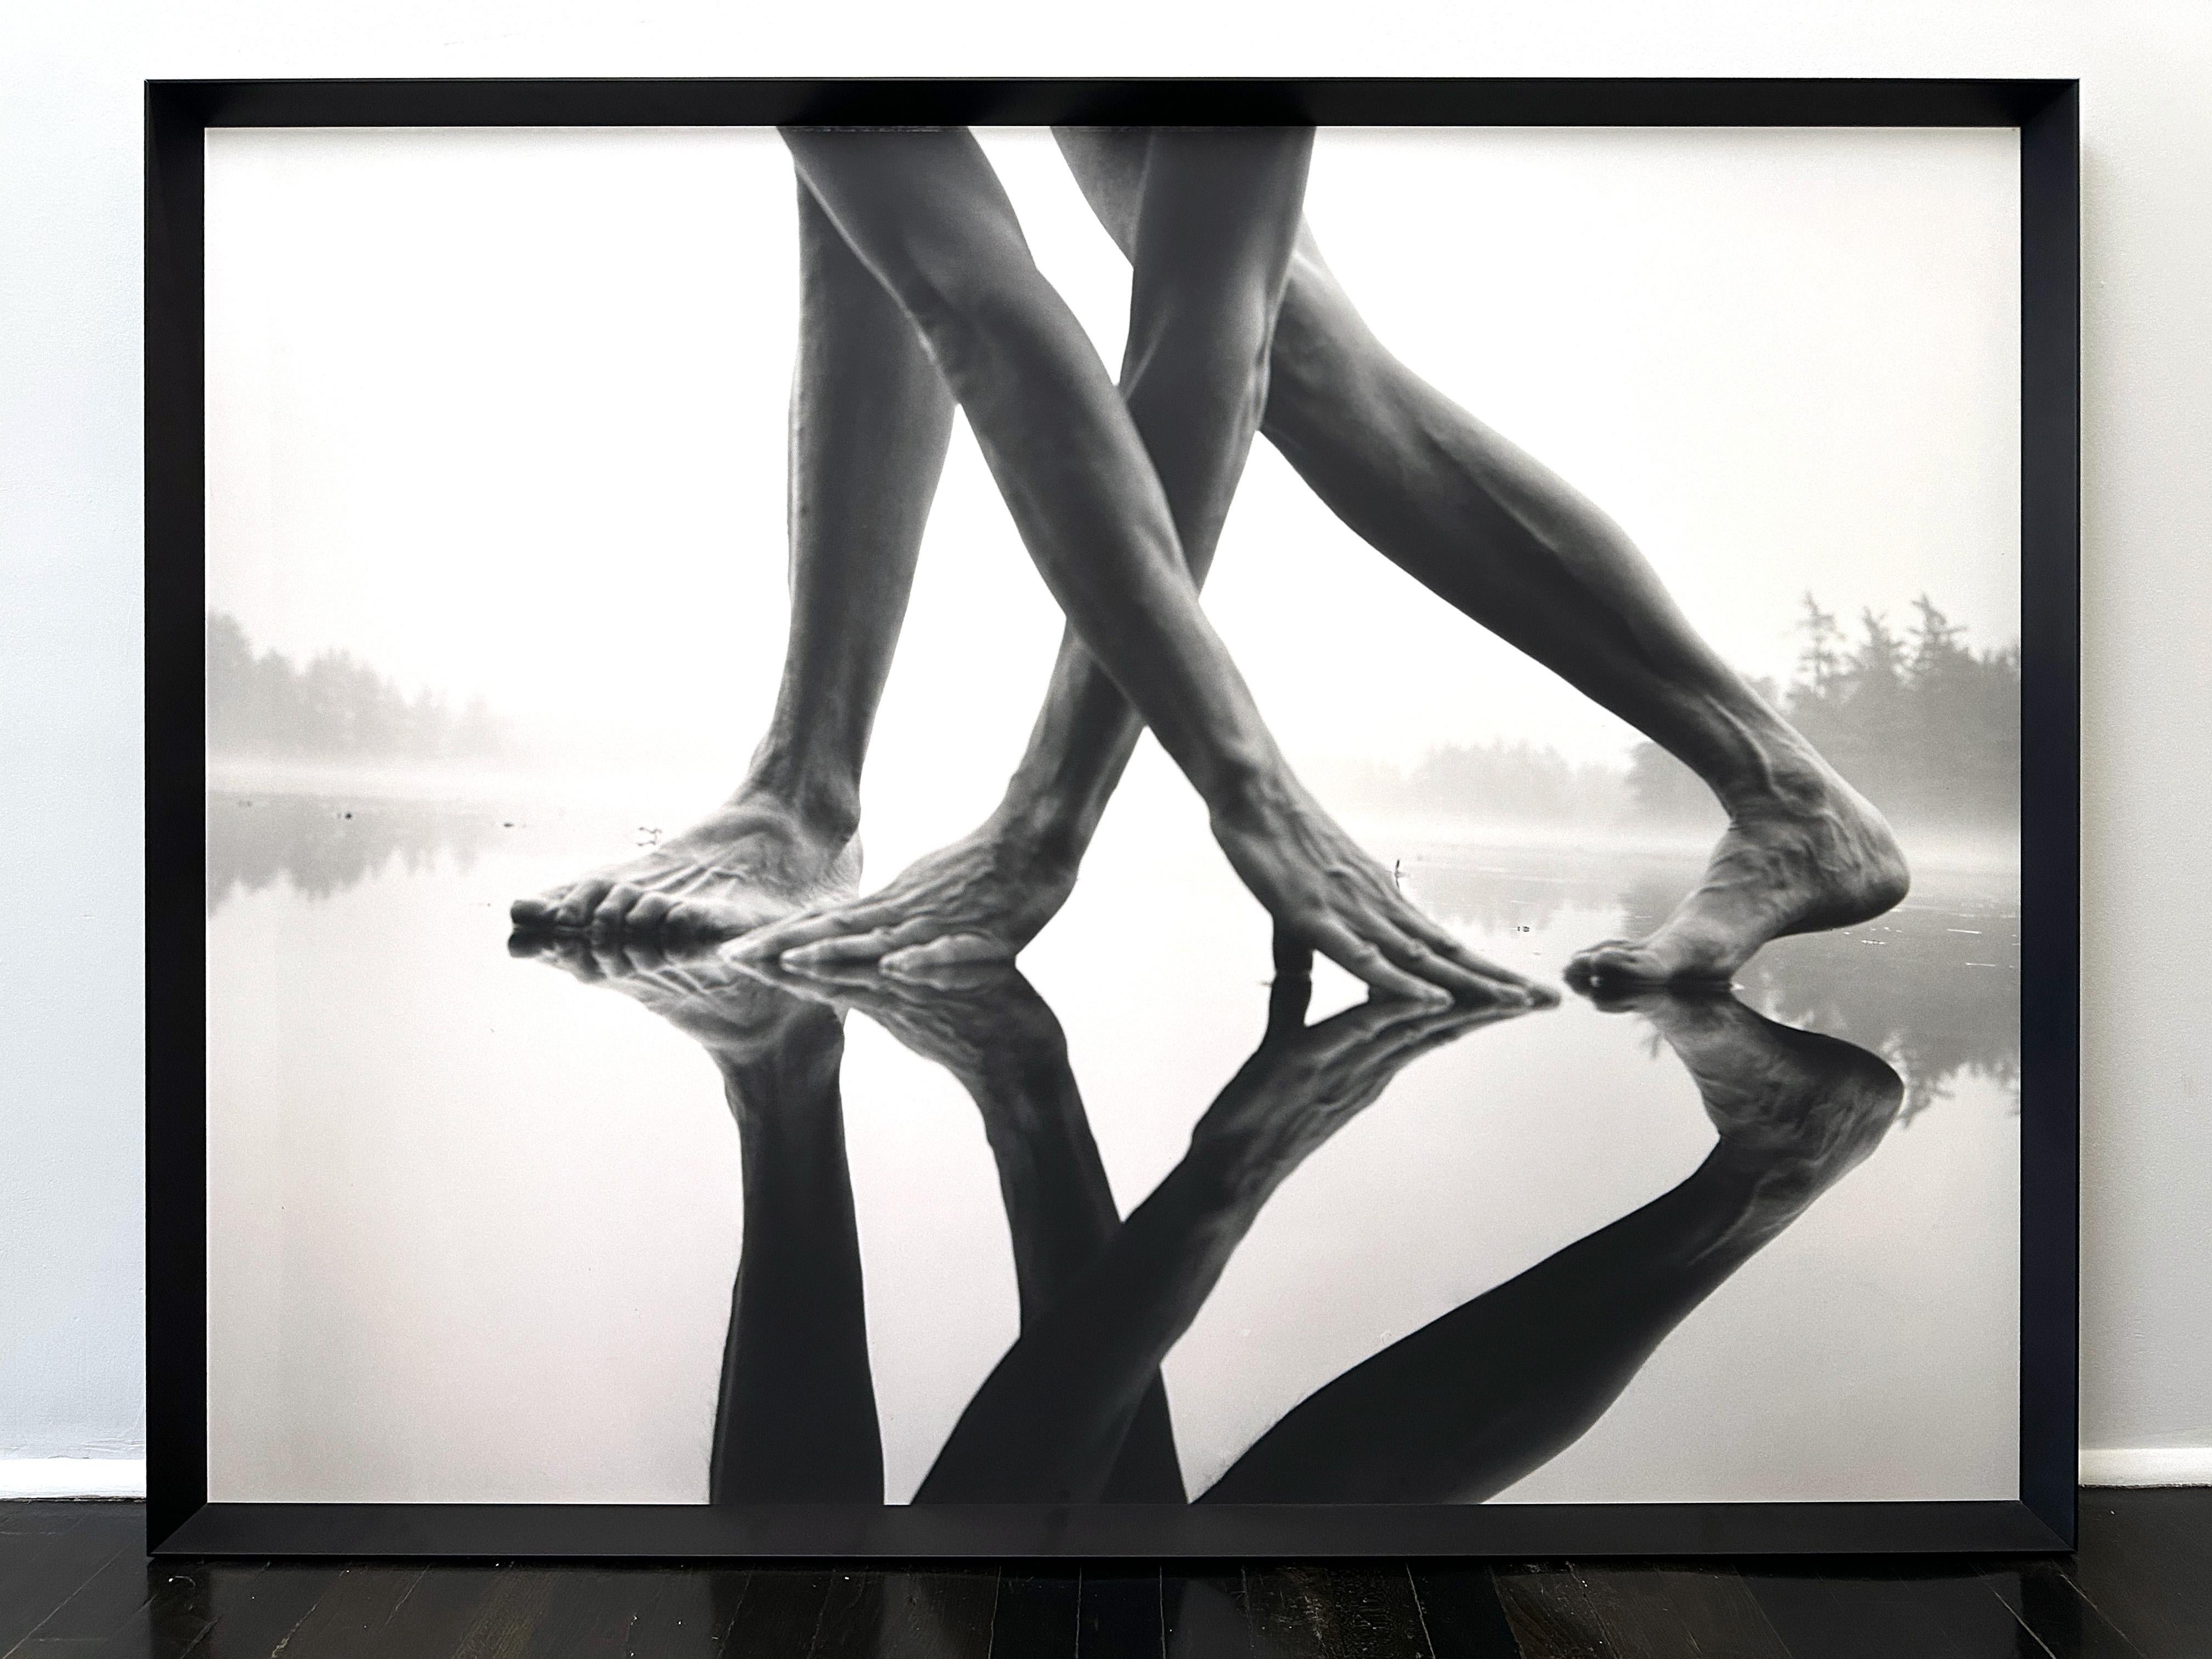 Gelatin silver print mounted on aluminium sheet with a suttle slanted metal black frame. Titled 